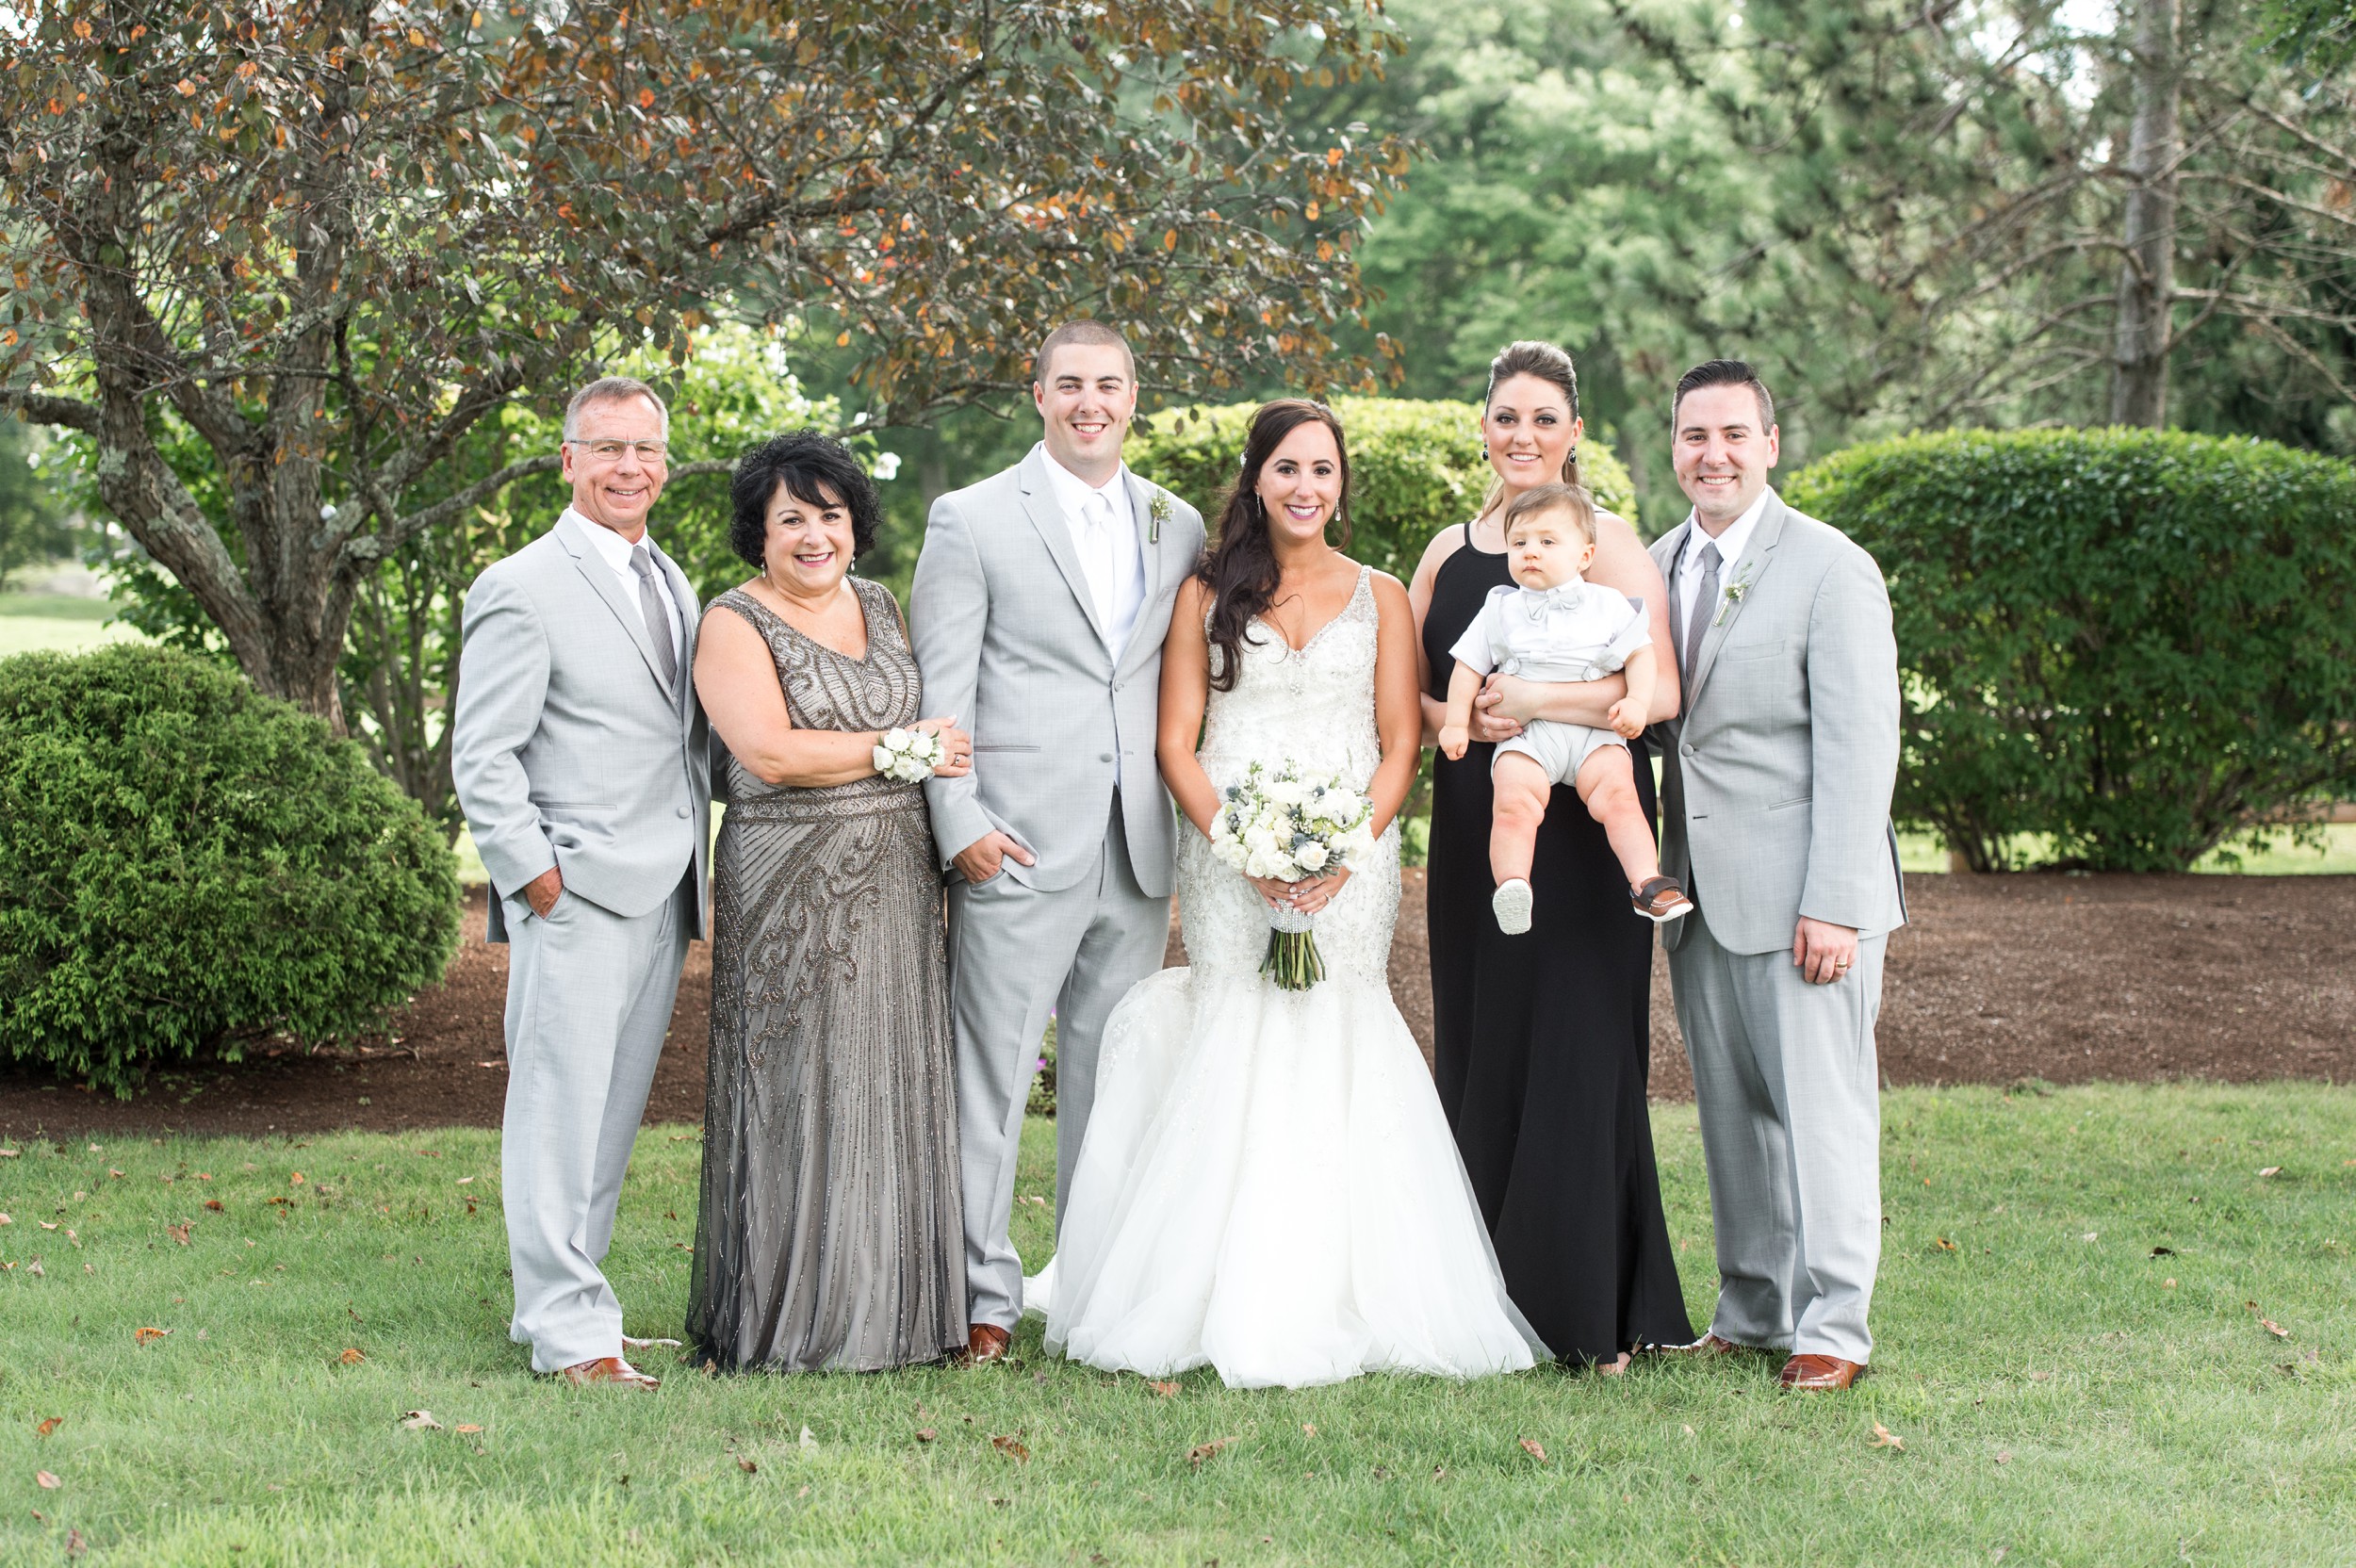 Wedding Planning Family Portraits Made Easy